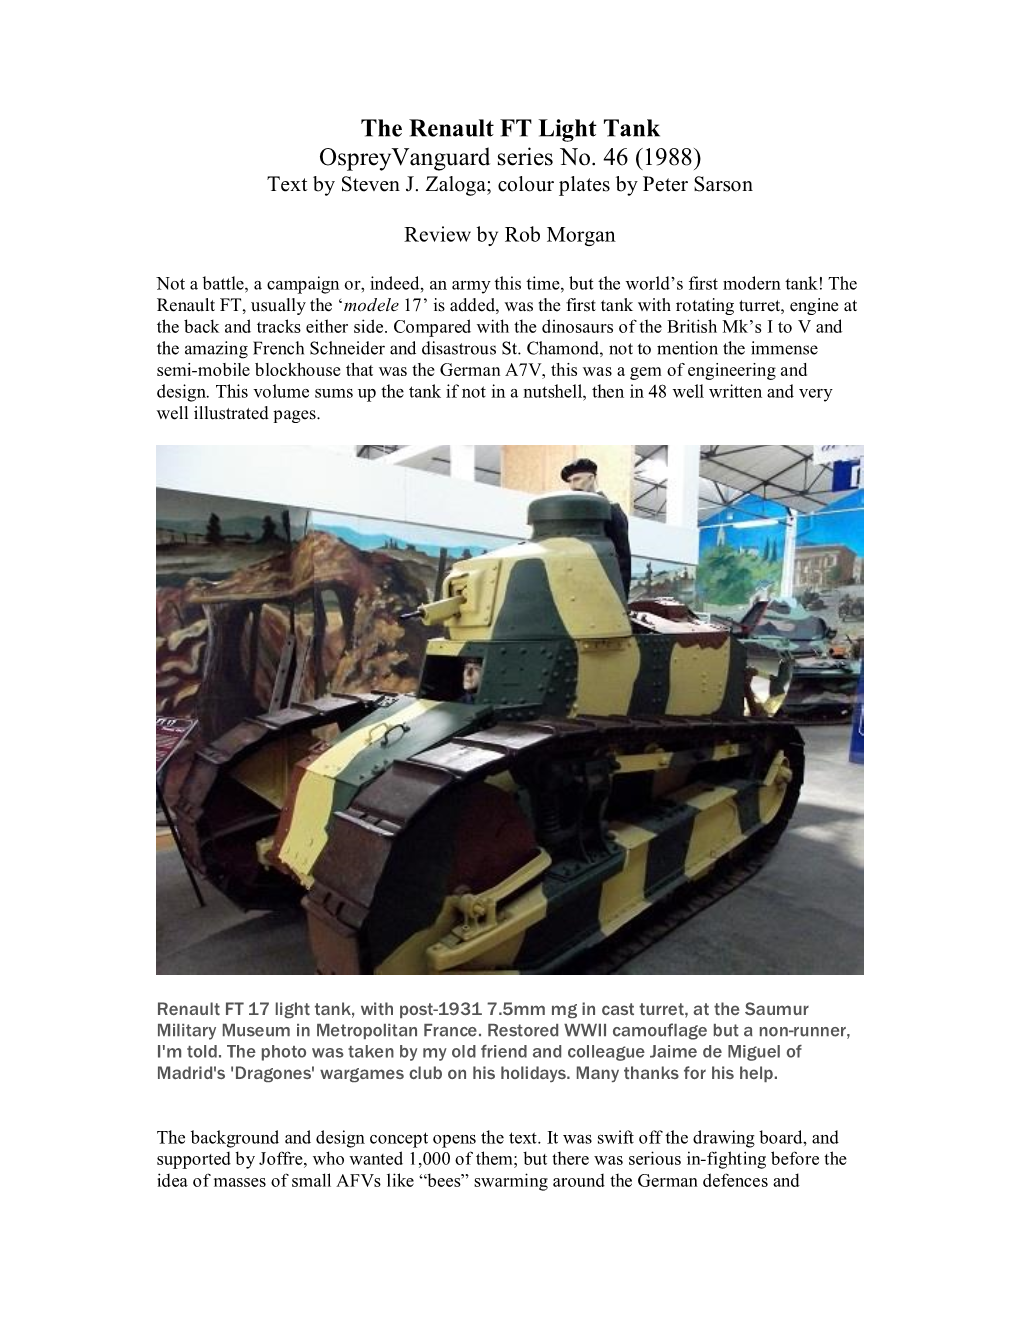 The Renault FT Light Tank Ospreyvanguard Series No. 46 (1988) Text by Steven J